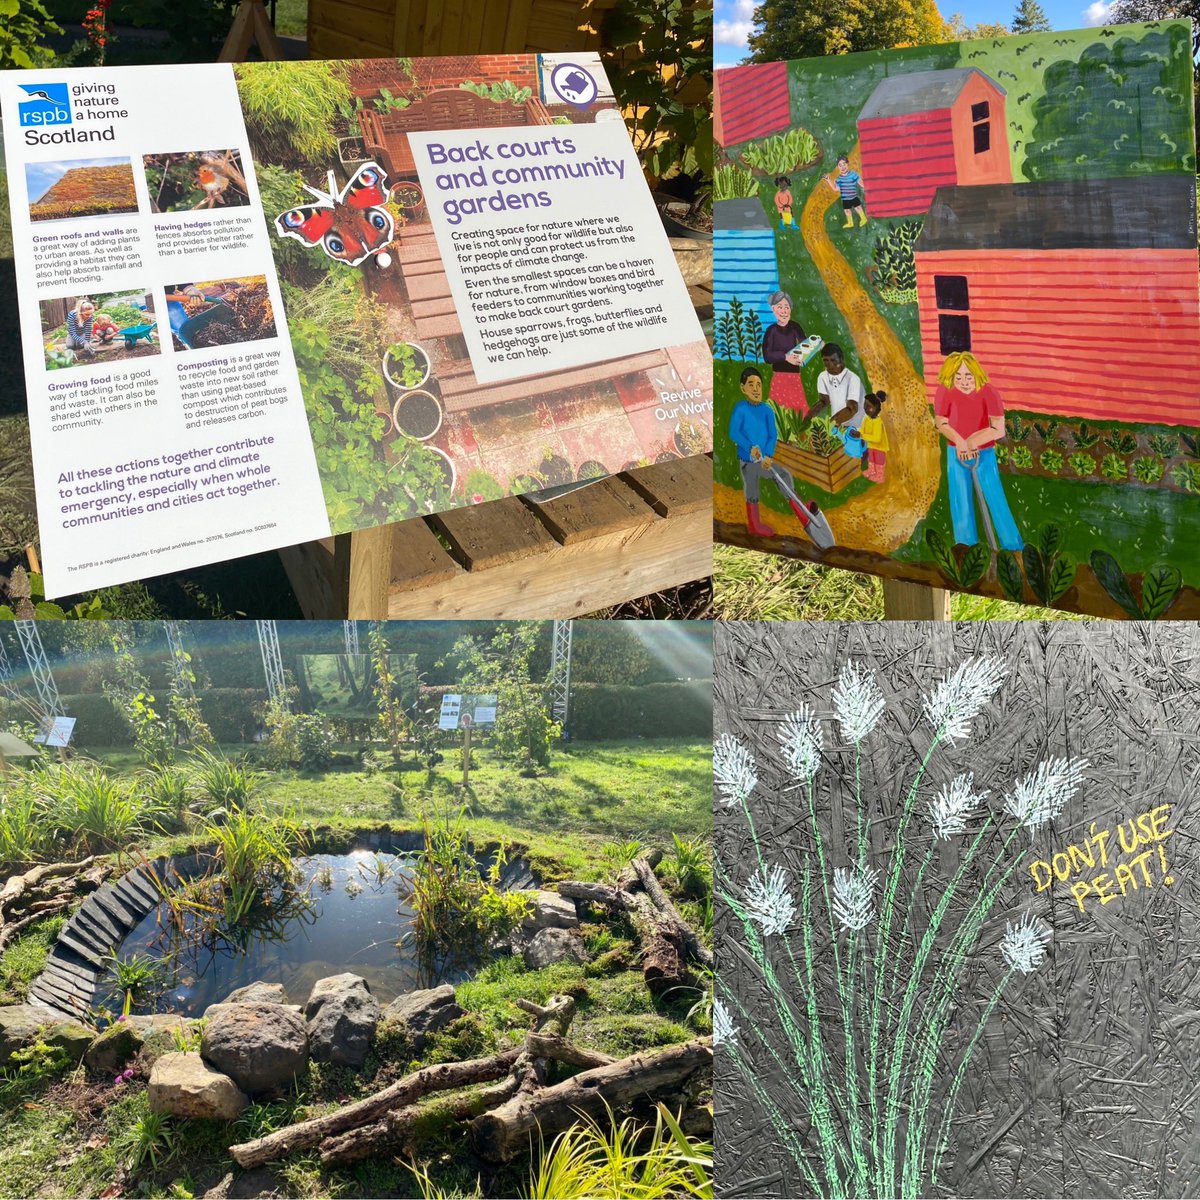 Gorgeous day☀️ for the launch of the @RSPBGlasgow #GlasgowtoGlobe 🌍💚 garden at @GlasgowBotanic Gardens. Well done everyone! It’s a beautiful green space, packed with info, art, lovely plants & nature-friendly features too! #greenroof #raingarden #reviveourworld #PeatFree #COP26